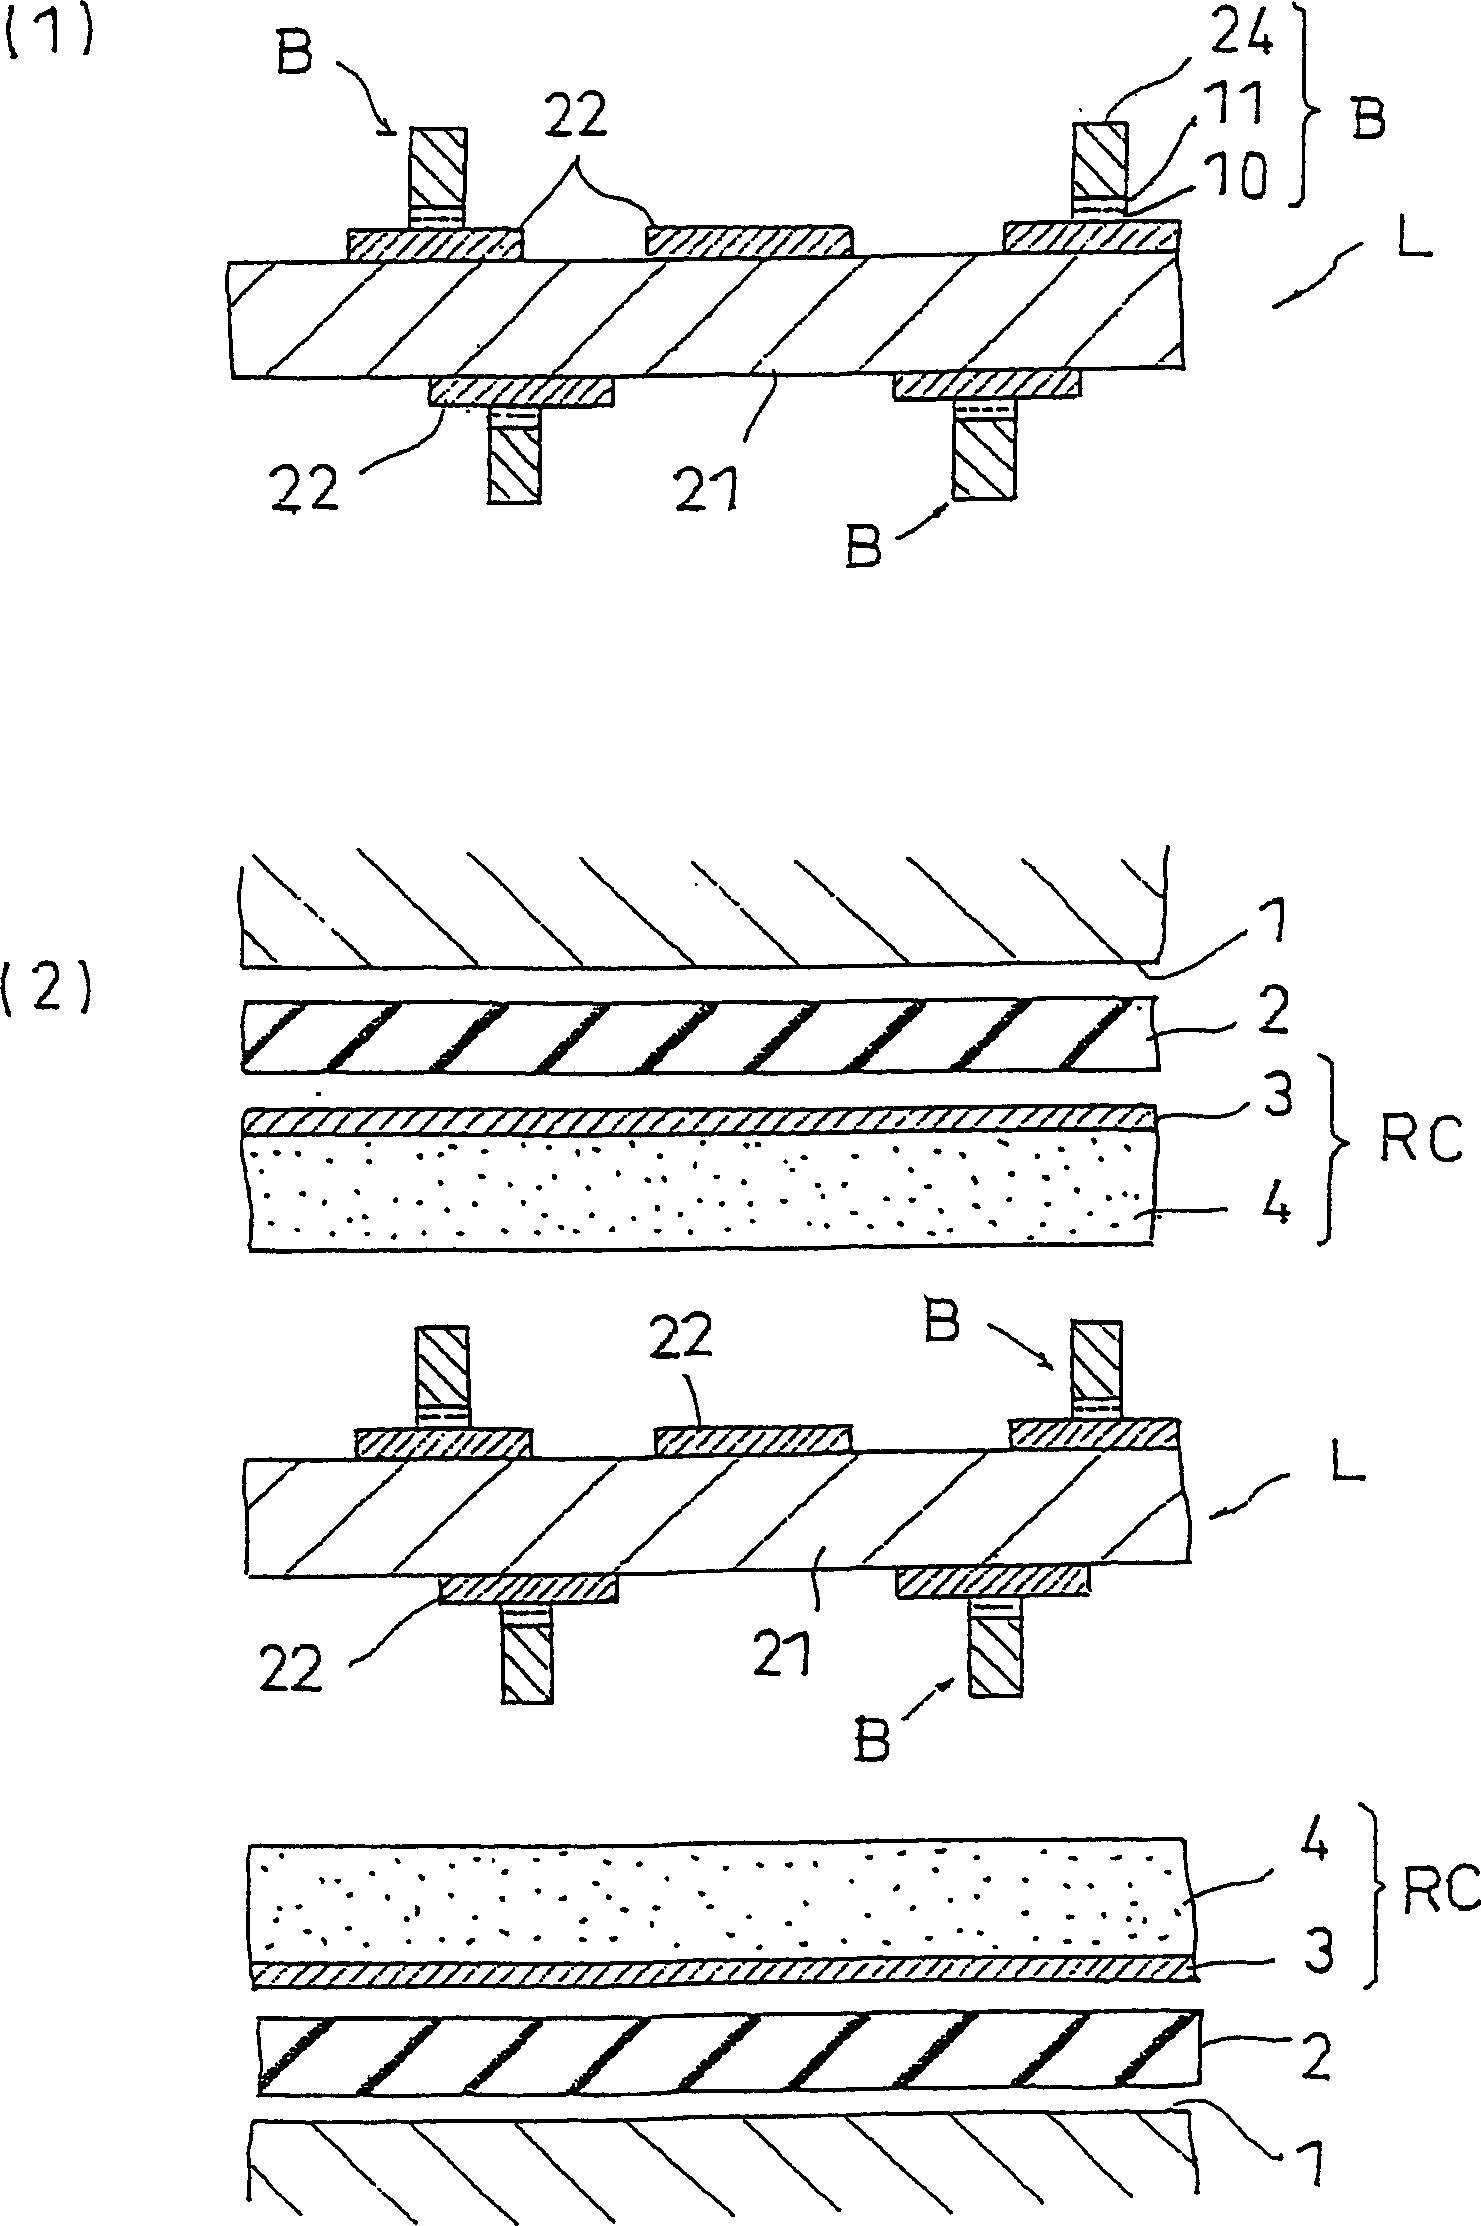 Interlayer connection structure and its building method